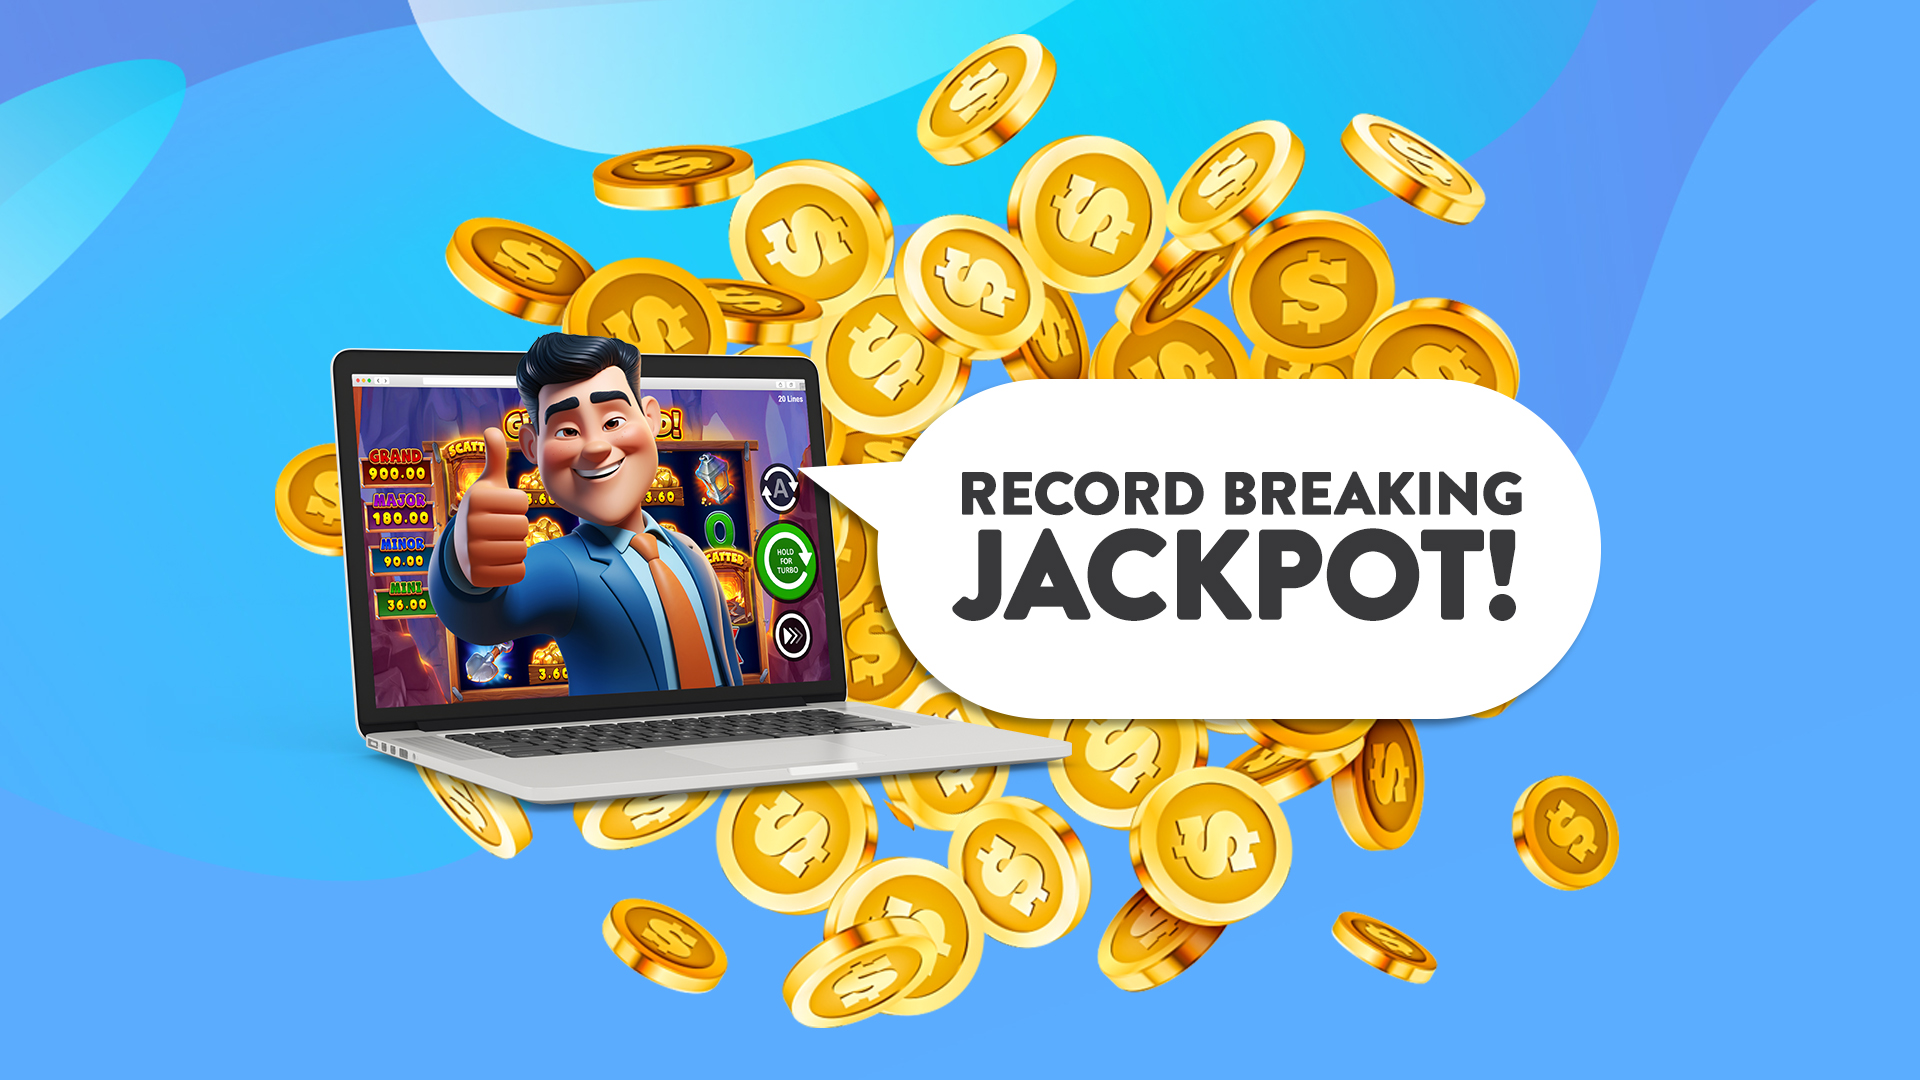 A cartoon man in a suit coming out of a laptop screen, with a speech bubble that reads ‘Record Breaking Jackpot’, on a blue background.